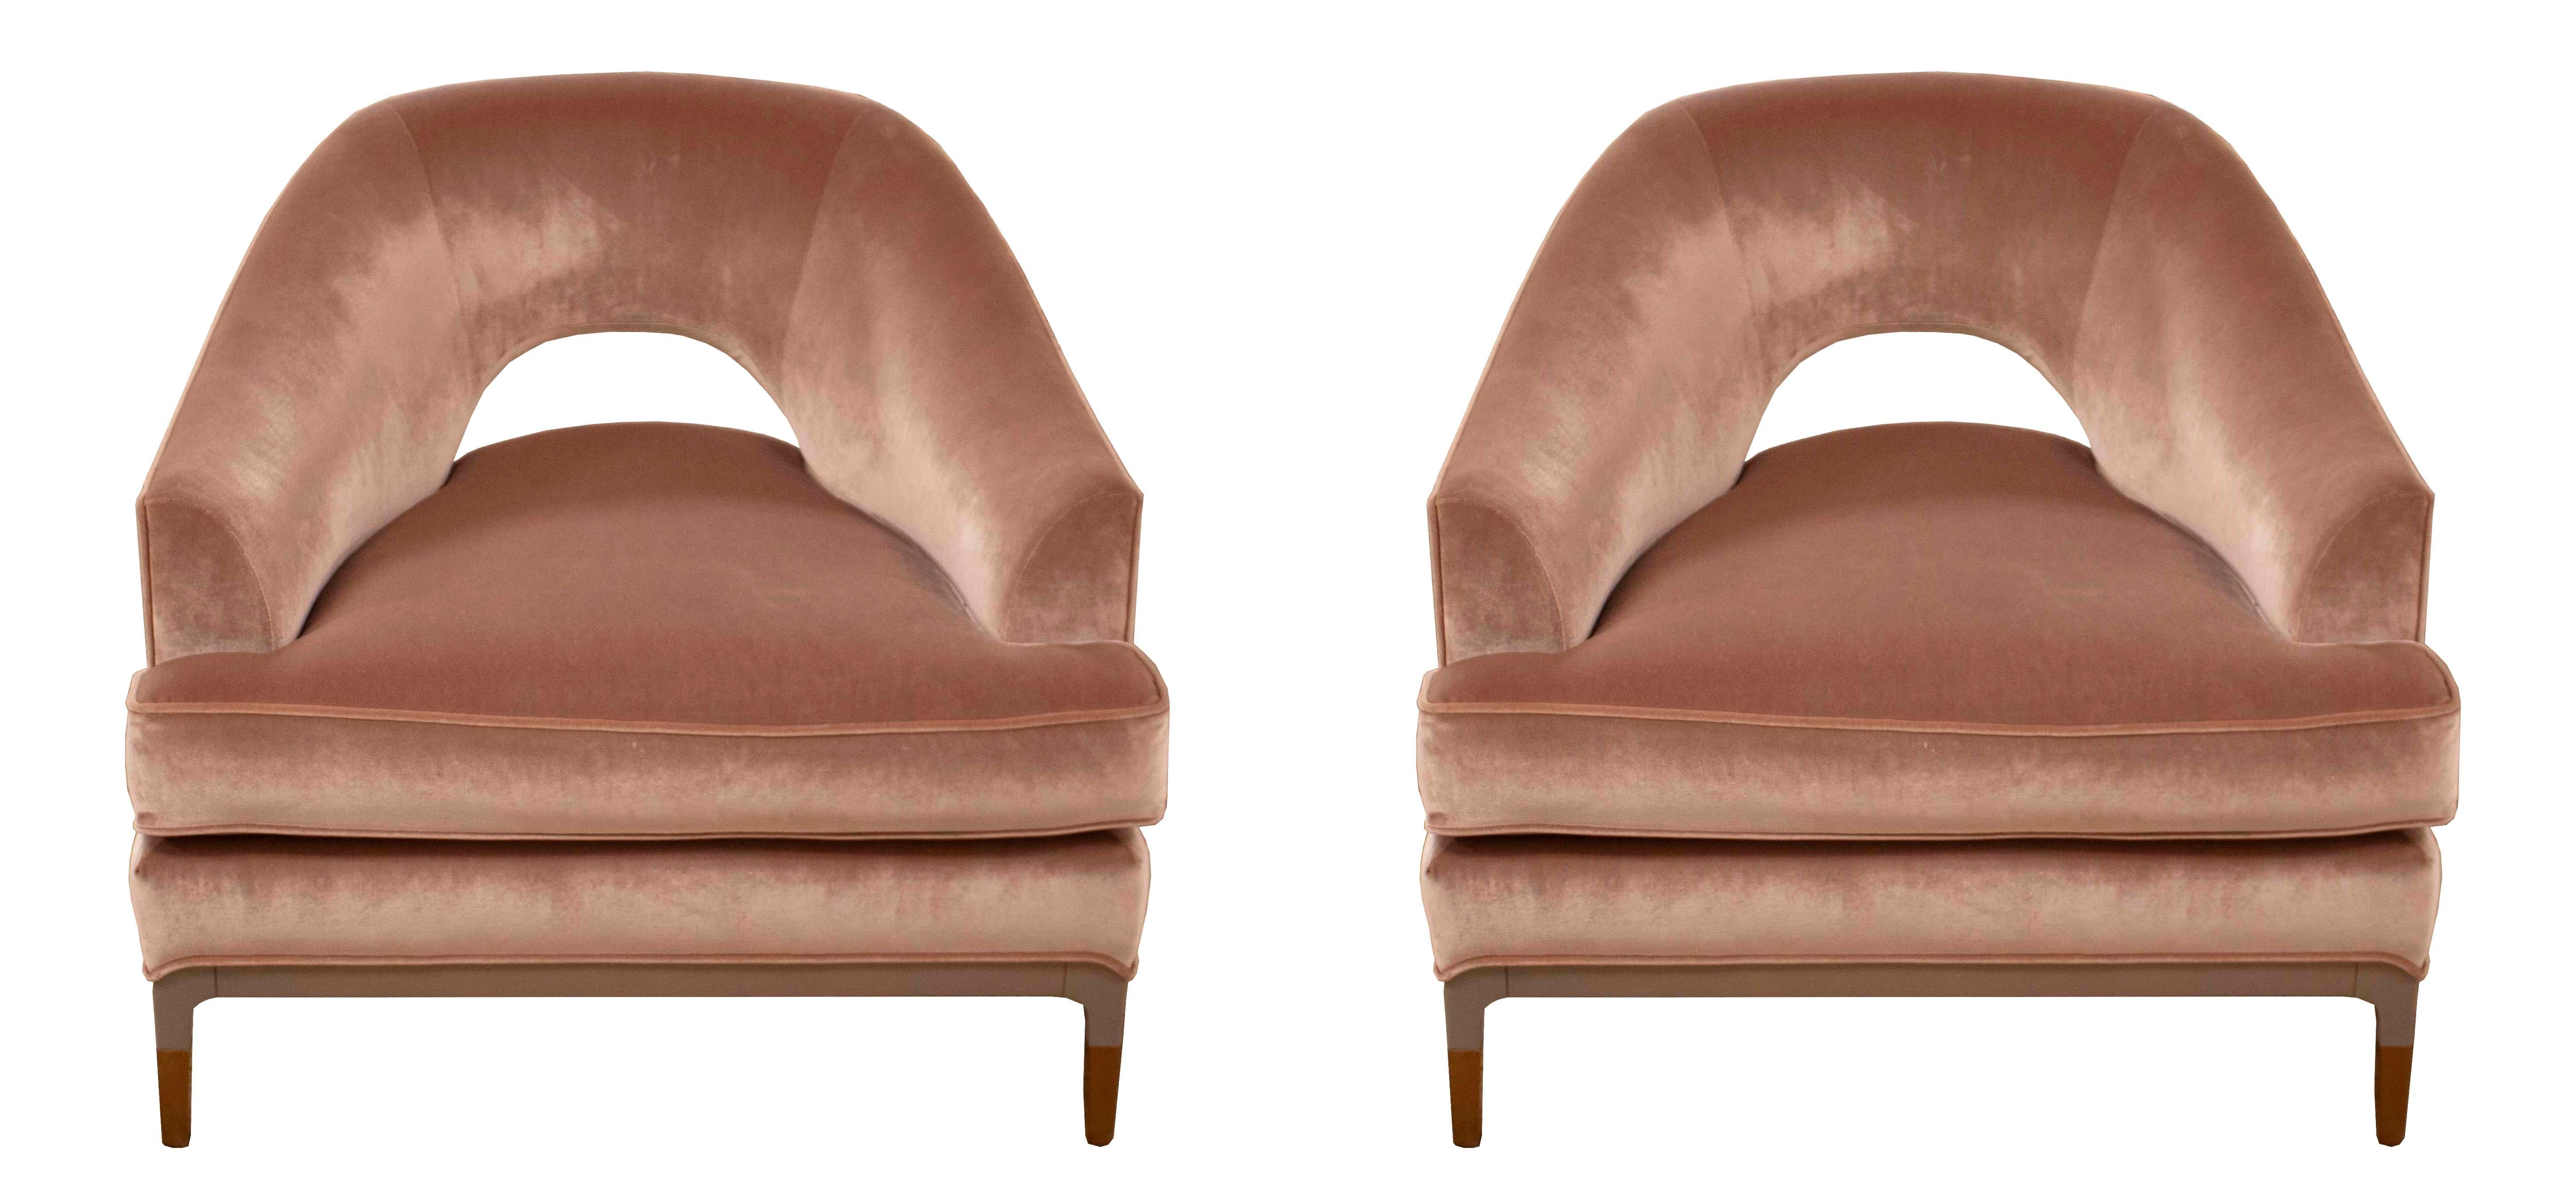 This pair of lounge chairs was designed by Jean-Louis Denoit for Baker and is upholstered in a sophisticated blush velvet with the legs and frame in both a nougat wood and an antique bronze finish. The curved back and attention to detail makes these